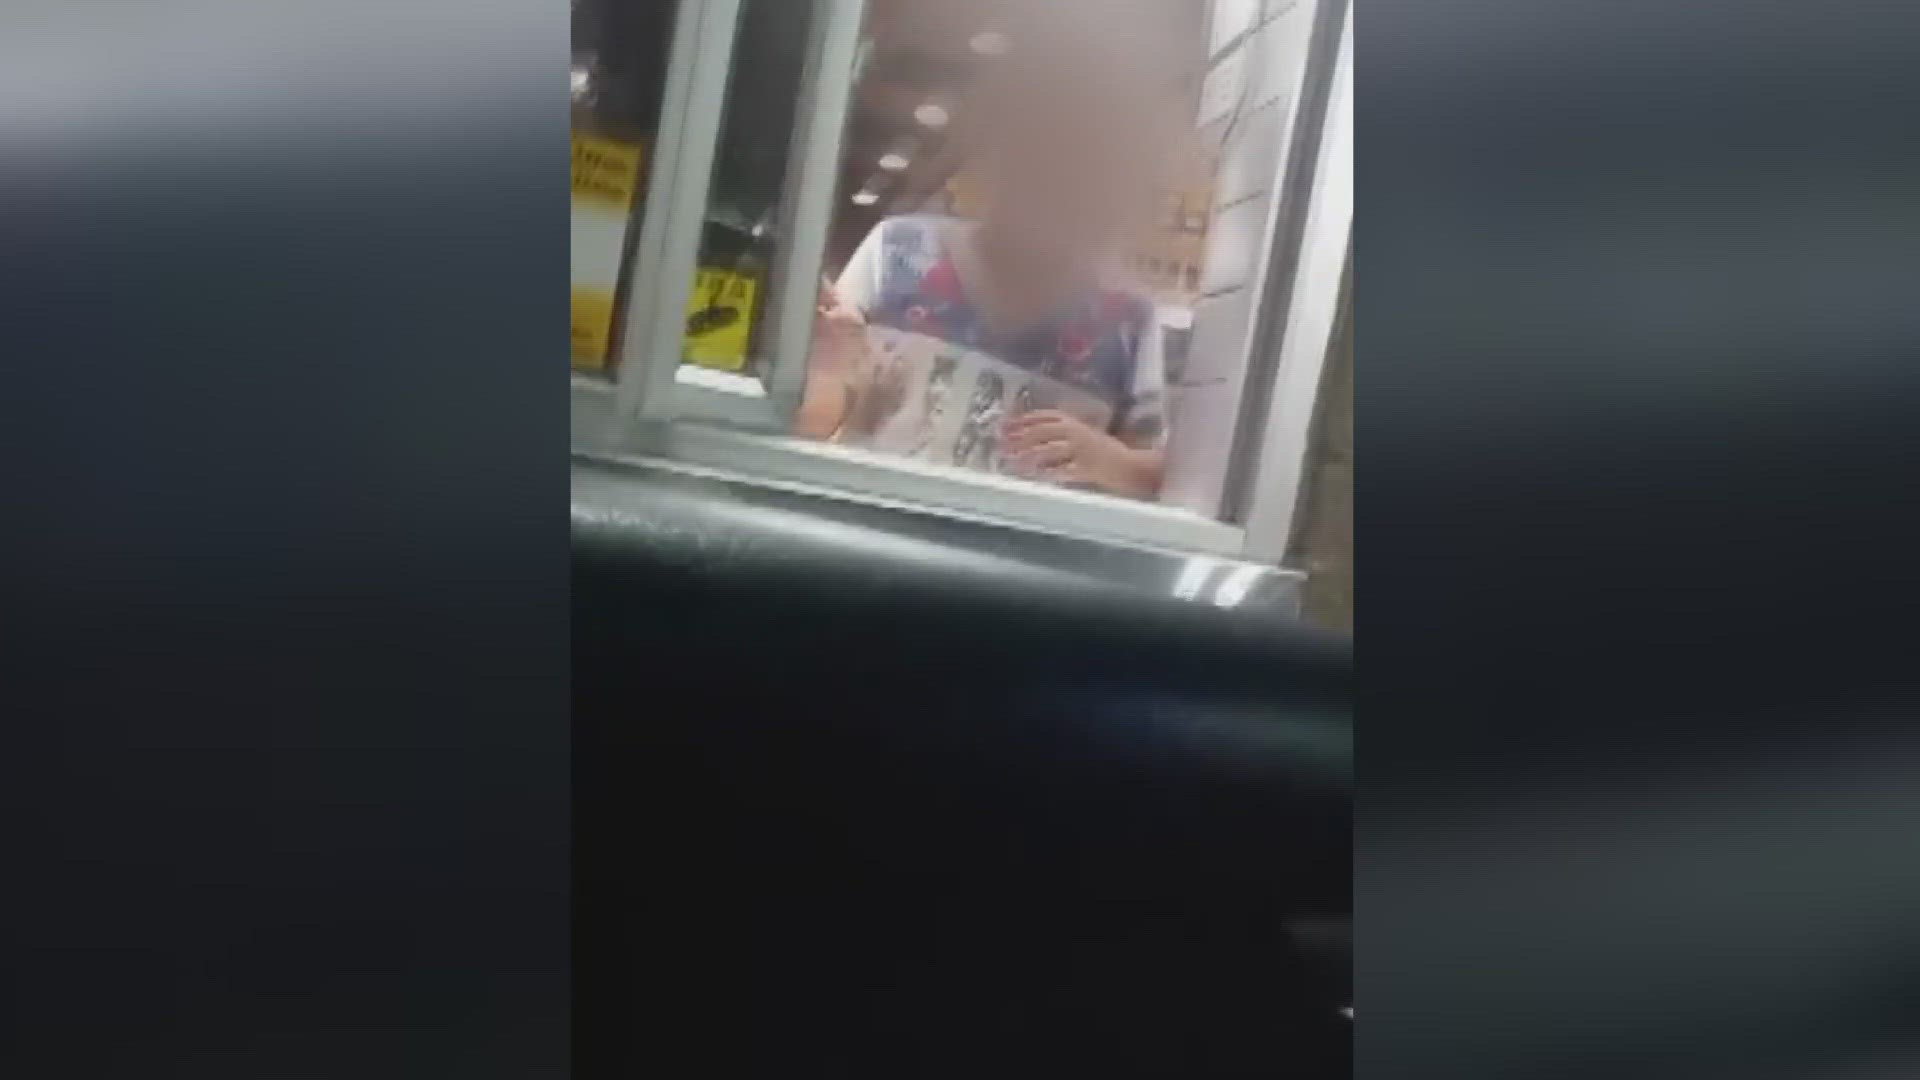 Two 10-year-old's were found working the drive-thru window and even operating a deep fryer, according to the Department of Labor.